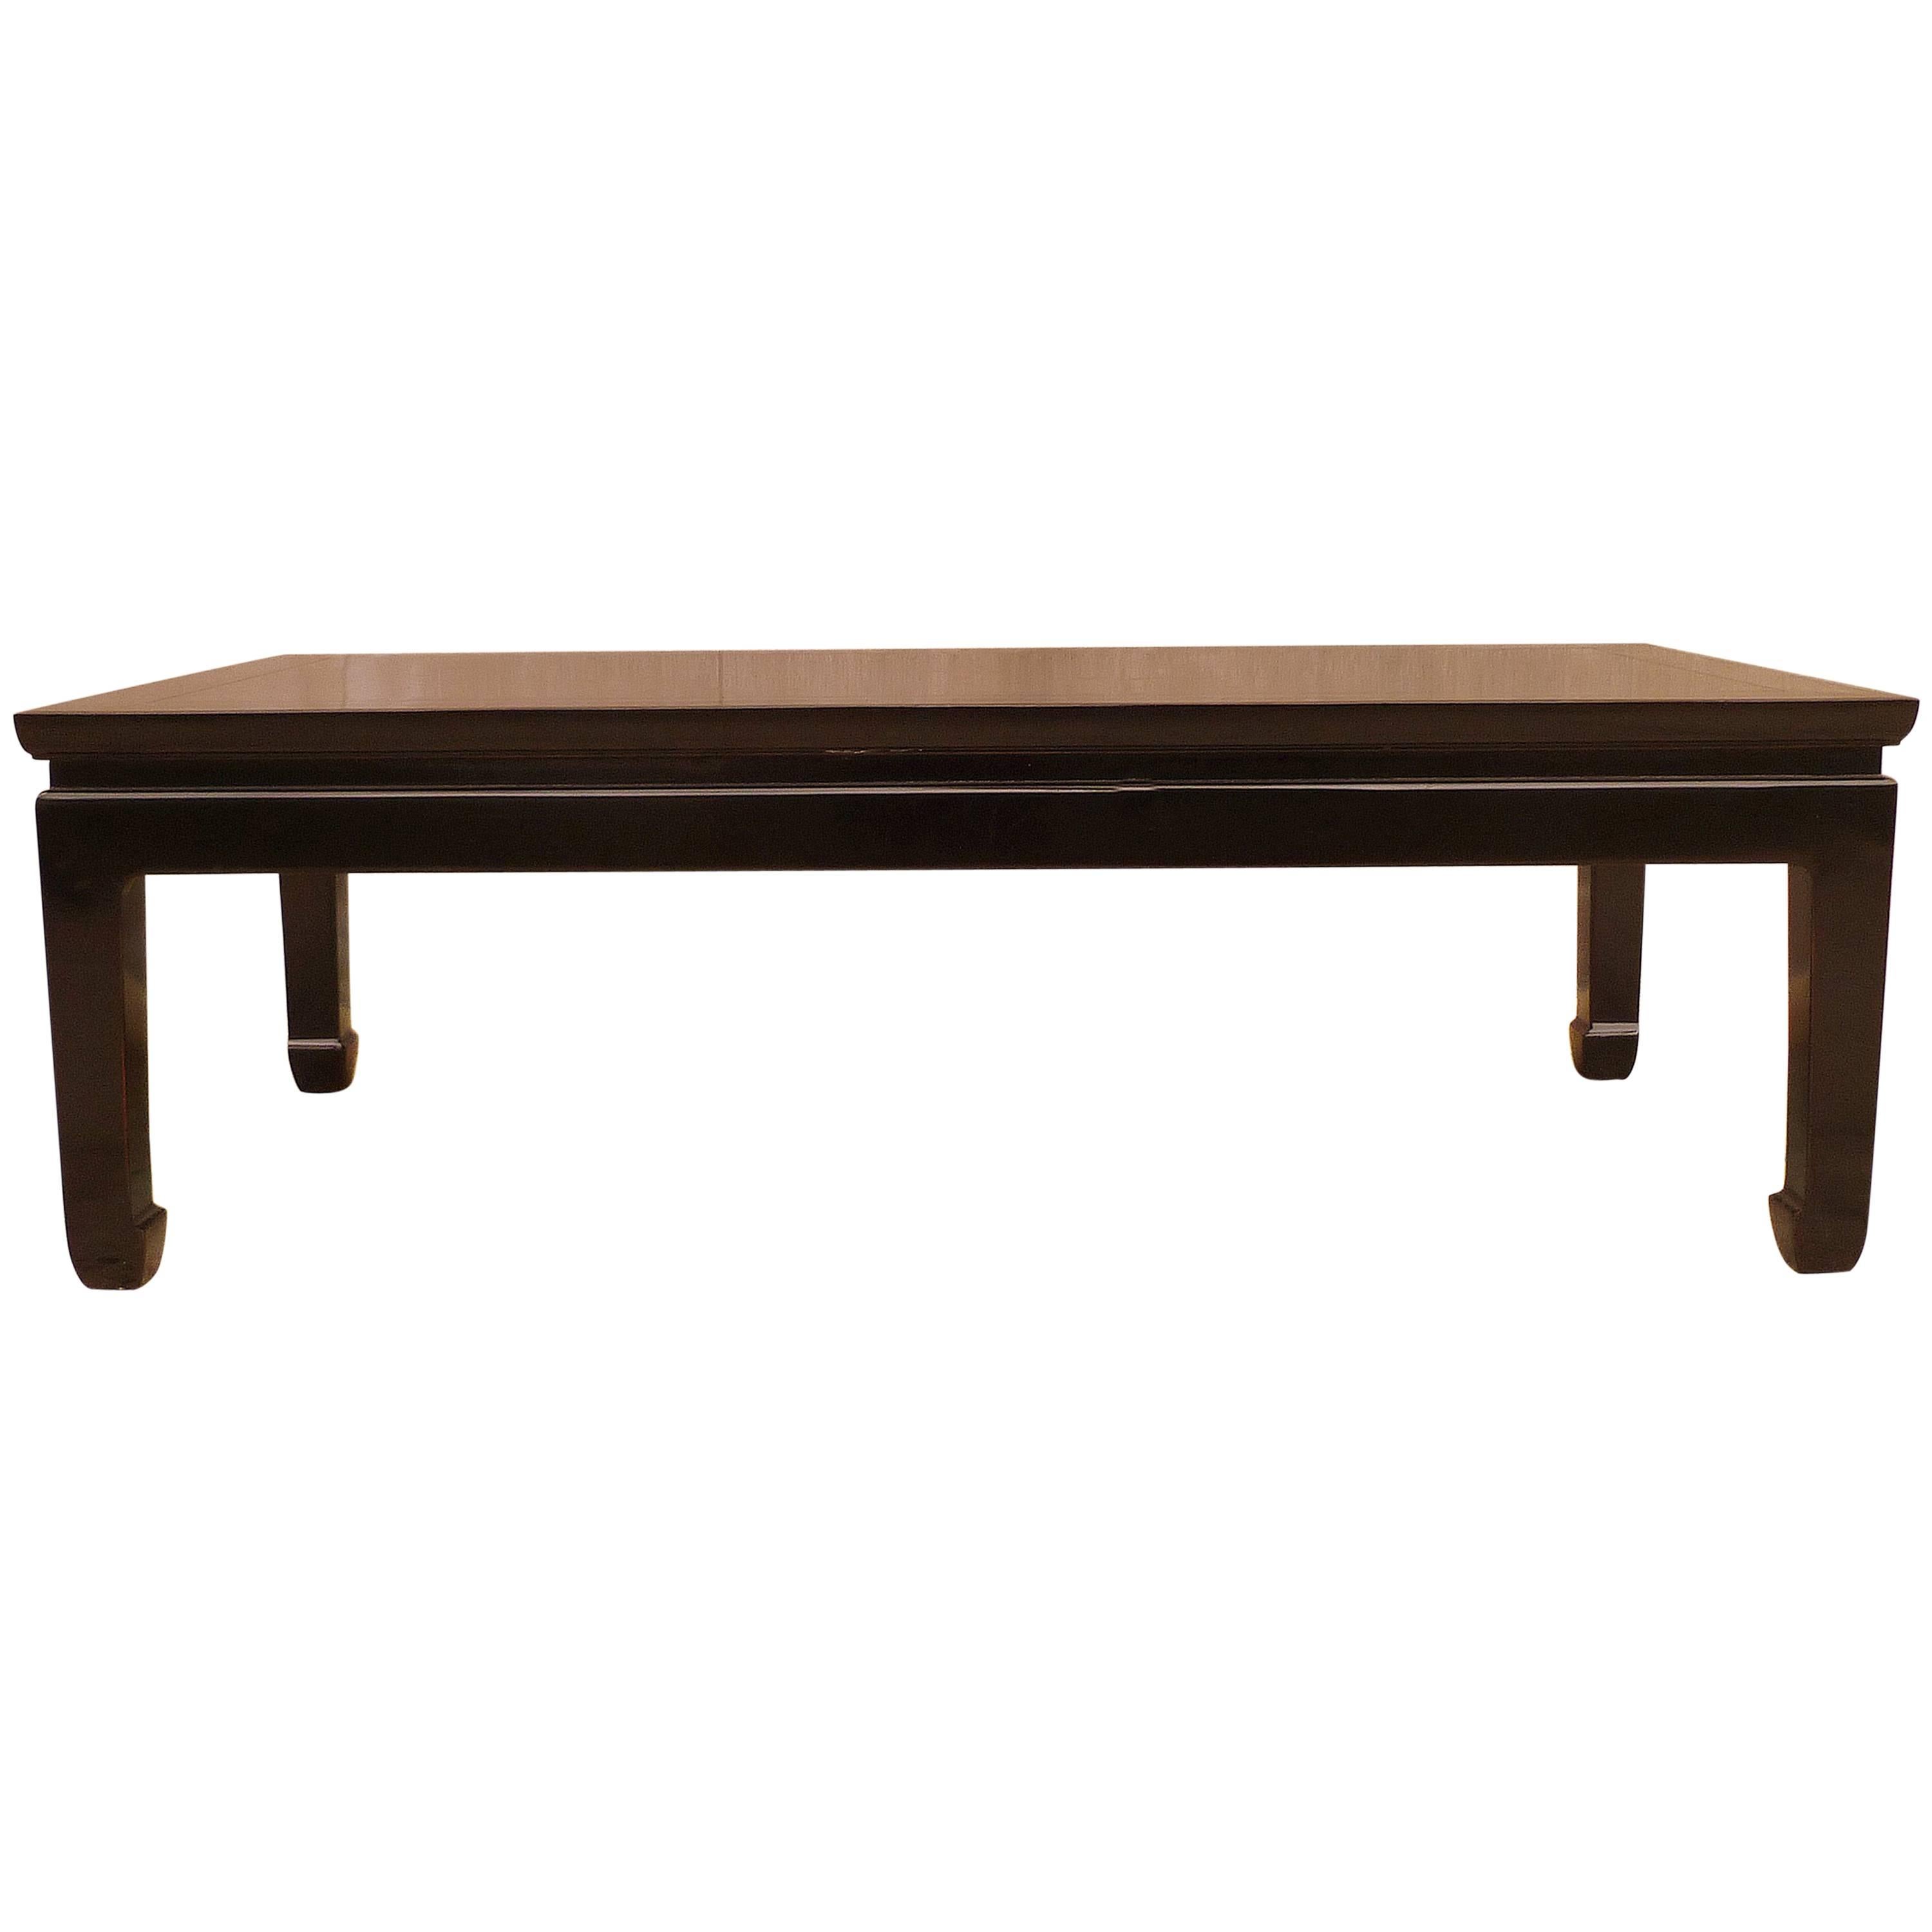 Fine Black Lacquer Rectangular Low Table with Fine Hand Painted Landscape Motif